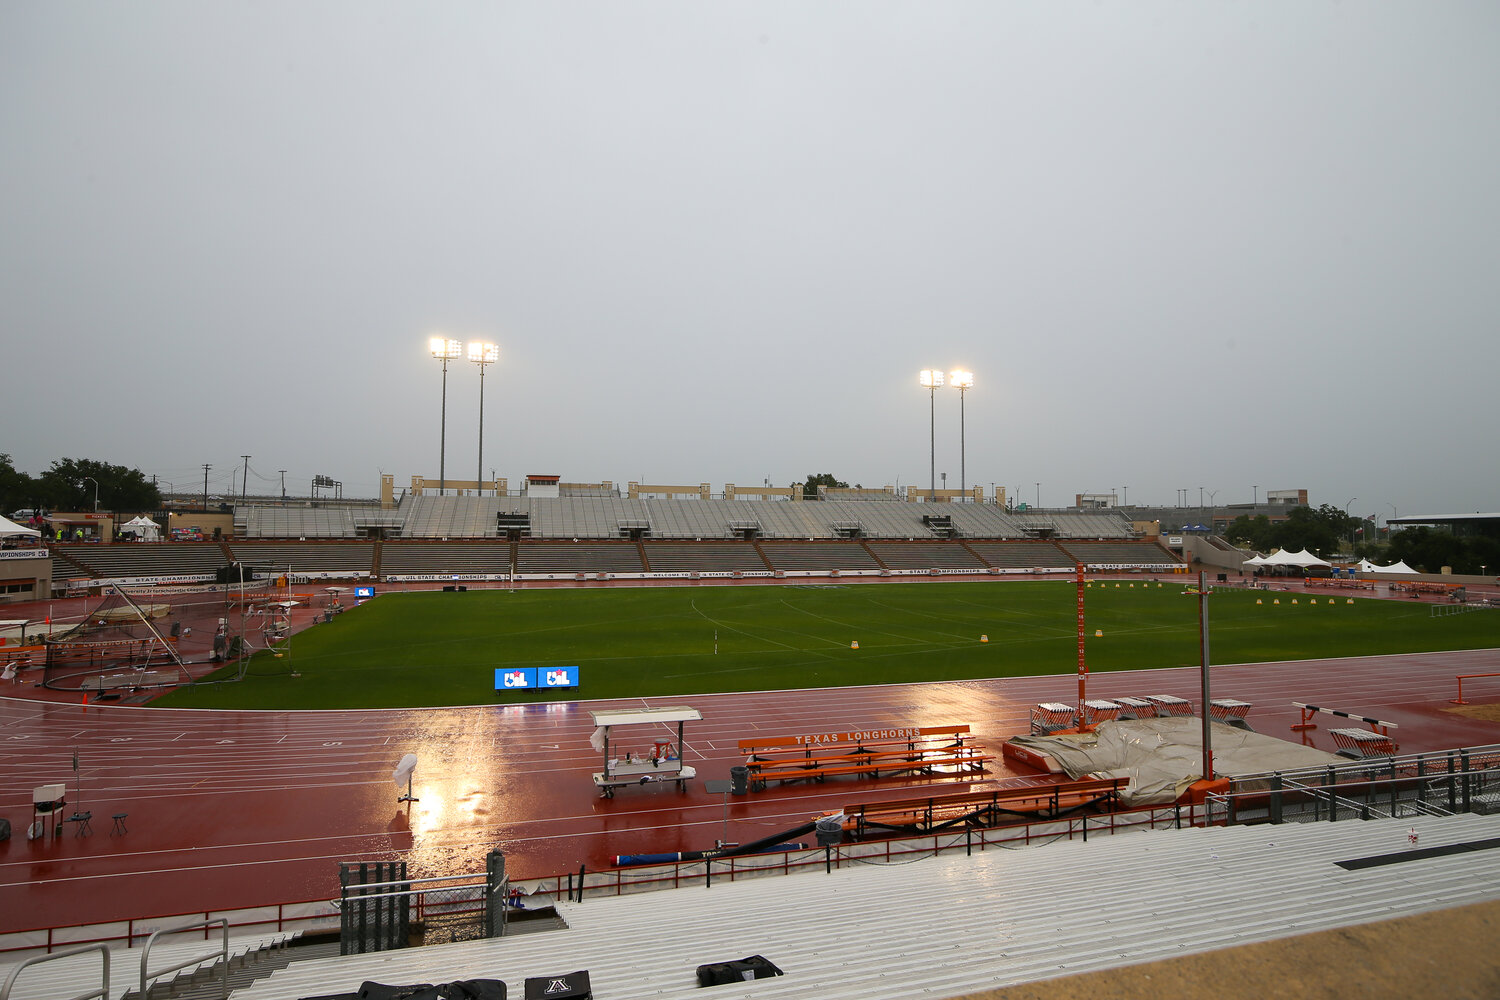 Inclement weather forced UIL officials to delay the start of Saturday’s 1A and 6A state track and field meet and then pause all events just 40 minutes after the 10 a.m. start due to lightning in the area, May 13, 2023 in Austin.